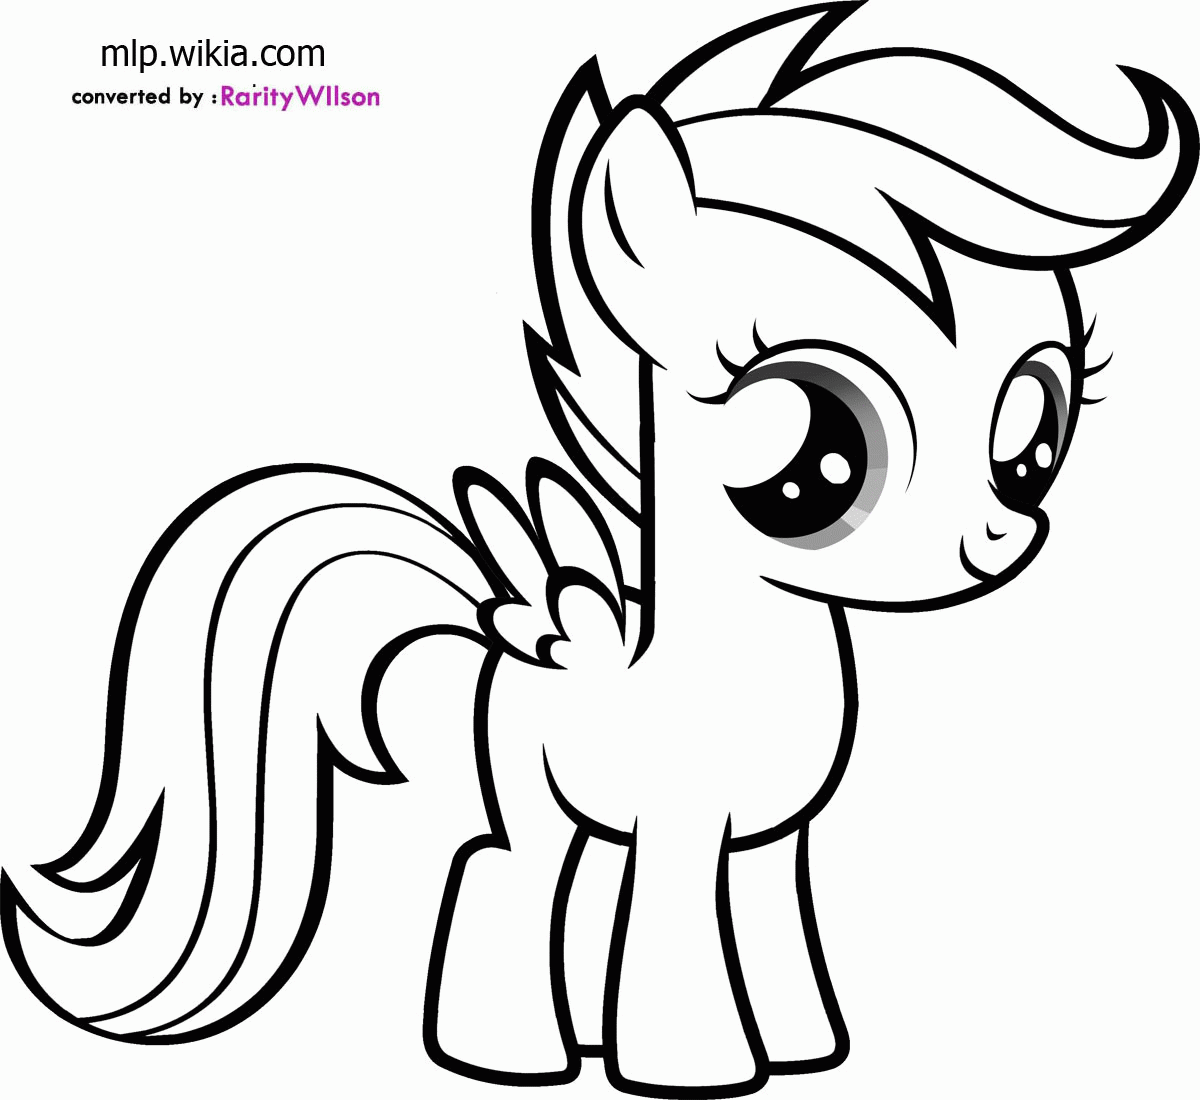 Scootaloo Coloring Pages | Coloring99.com - Coloring Kids